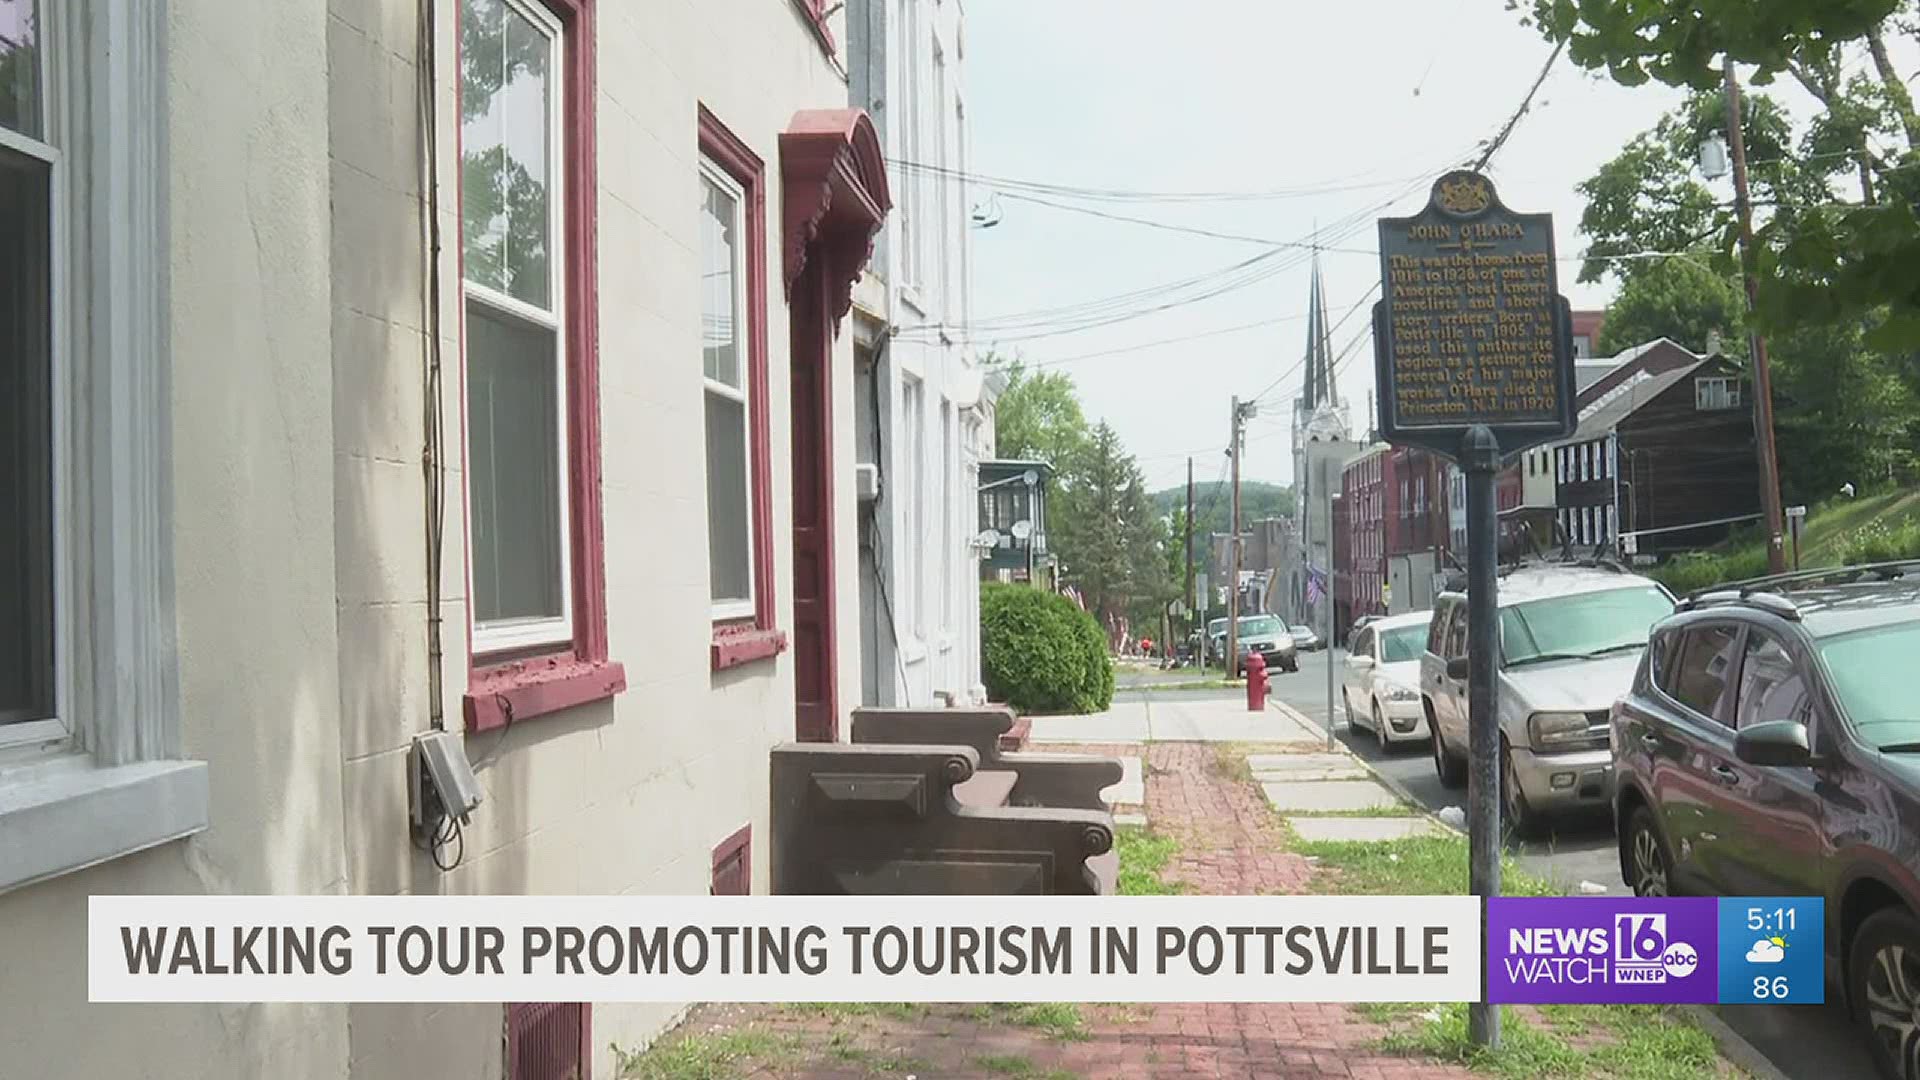 Come to Pottsville and see it all. That's the message from business owners in the Schuylkill County community.